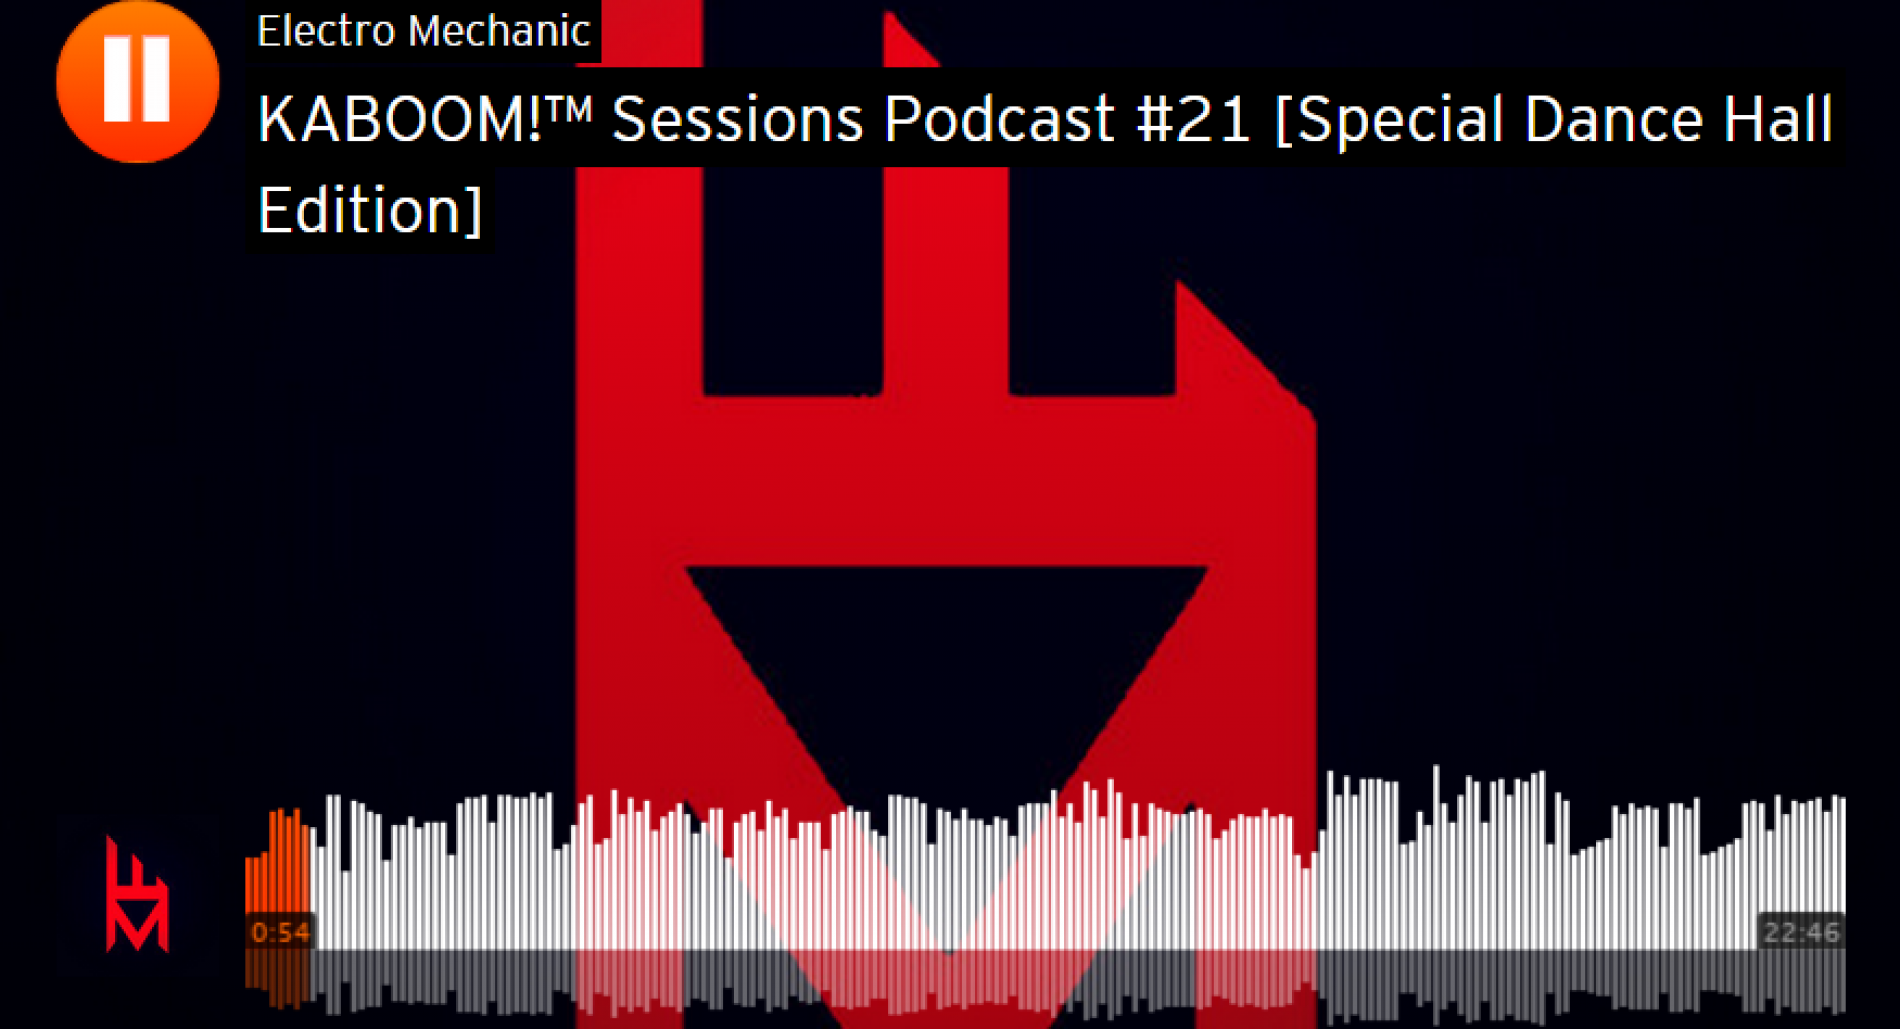 Electro Mechanic: KABOOM!™ Sessions Podcast #21 [Special Dance Hall Edition]